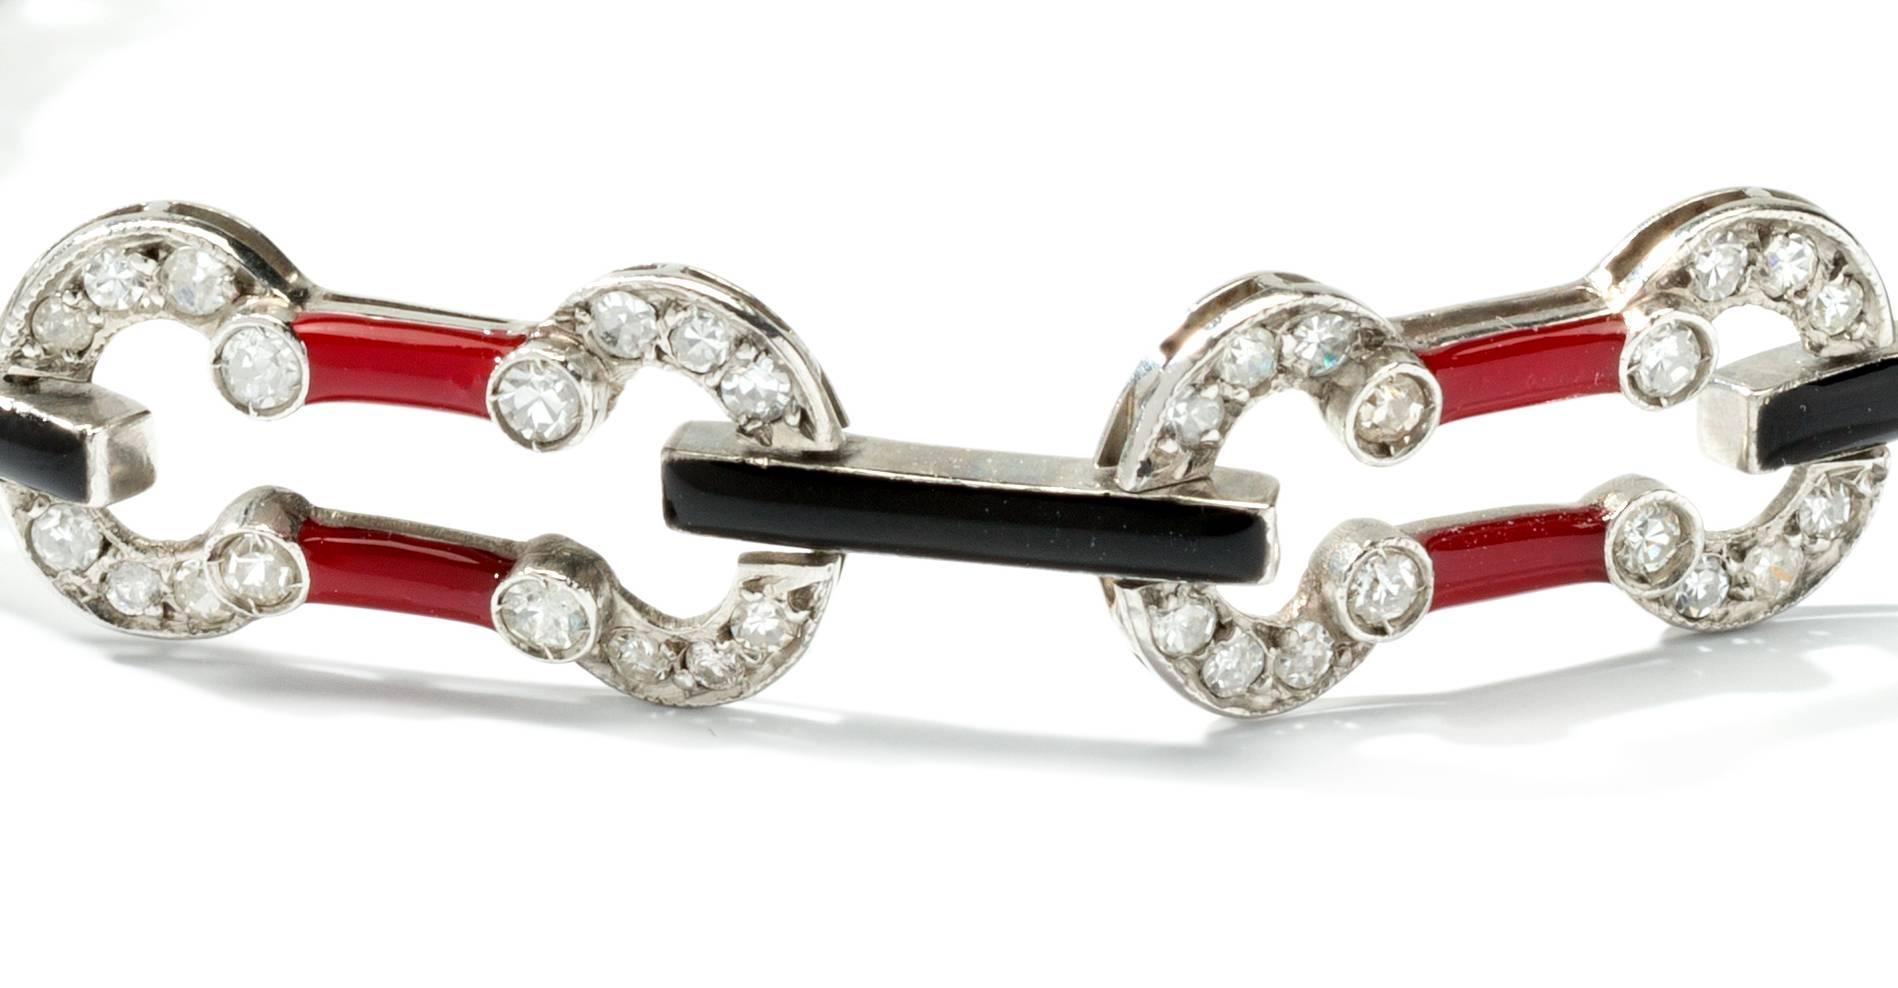 Europe, circa 1930. Art Deco set with 128 single-cut diamonds weighing circa 2.24 ct. With red and black enamel. Mounted in platinum. Total weight: 11,56 grams. Length: 7.09 in ( 18 cm )